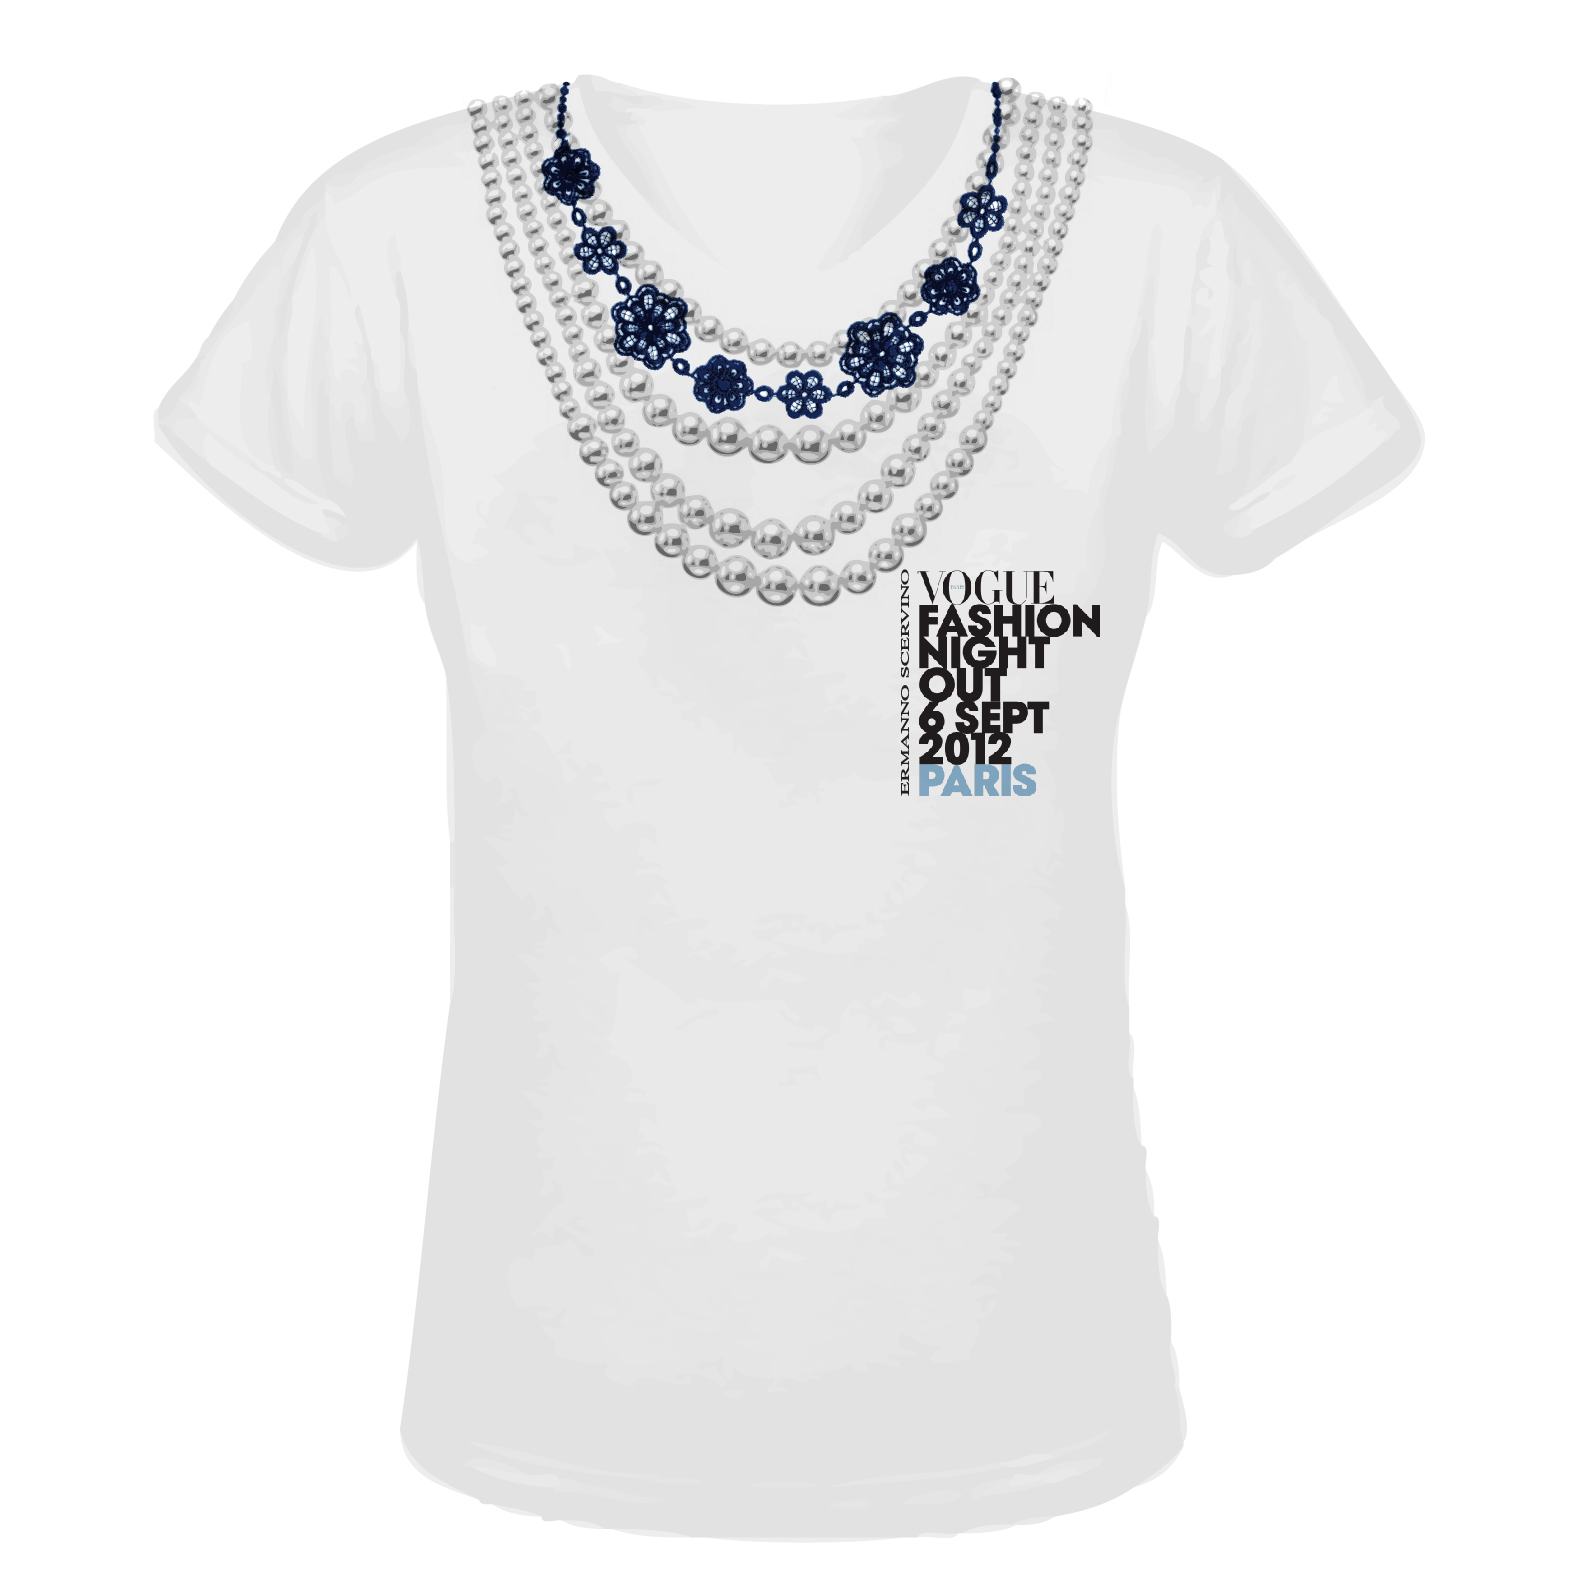 News On Style: VFNO 2012: la t-shirt limited edition firmata Ermanno ...